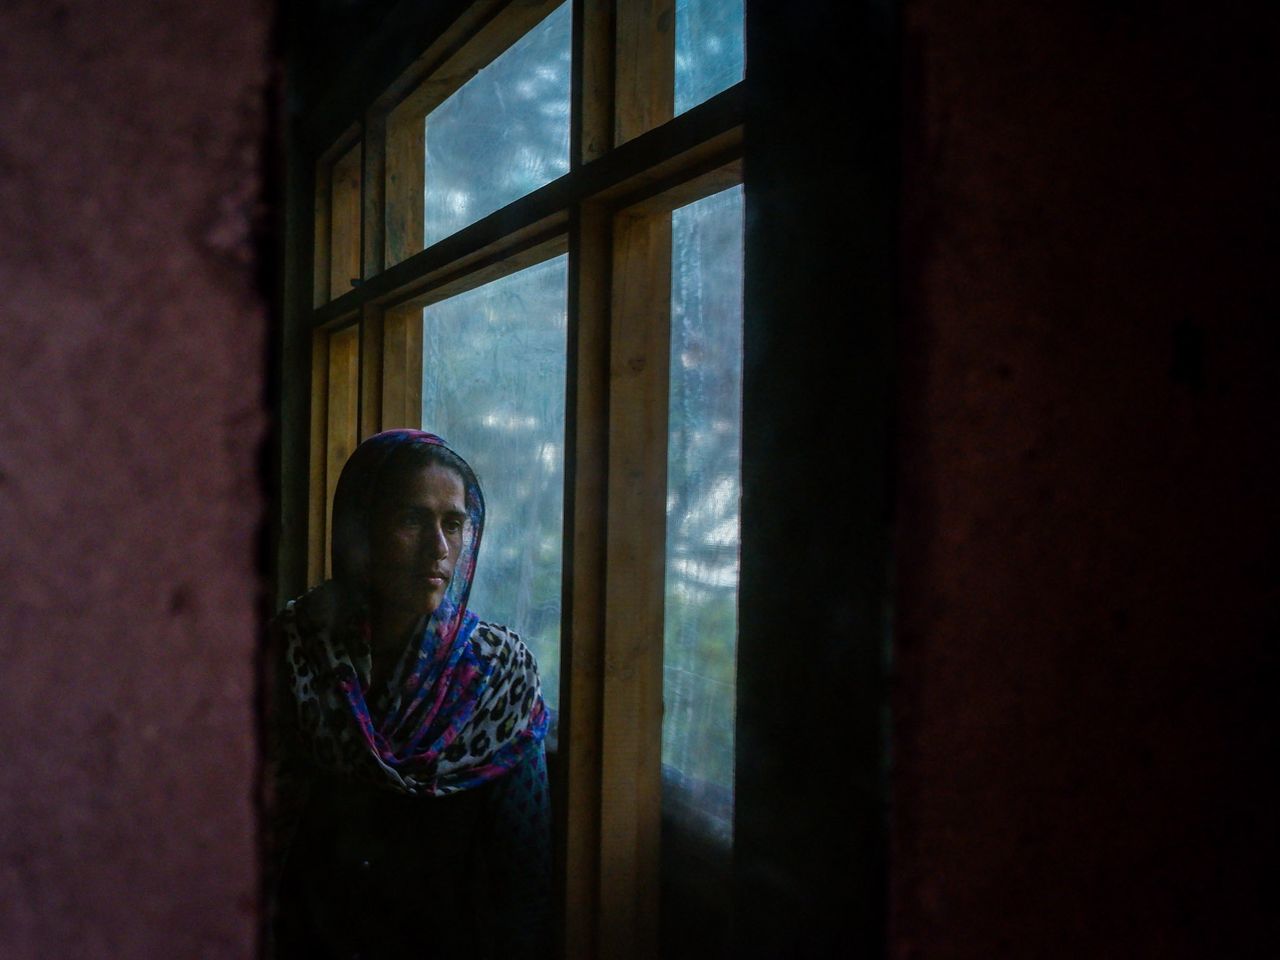 One of the myths Naseema believes in is that she will develop an infection on her face if she looks into a mirror while menstruating. Naseema stands in her kitchen as her frame is captured in the mirror. Date: 24 April, 2022.